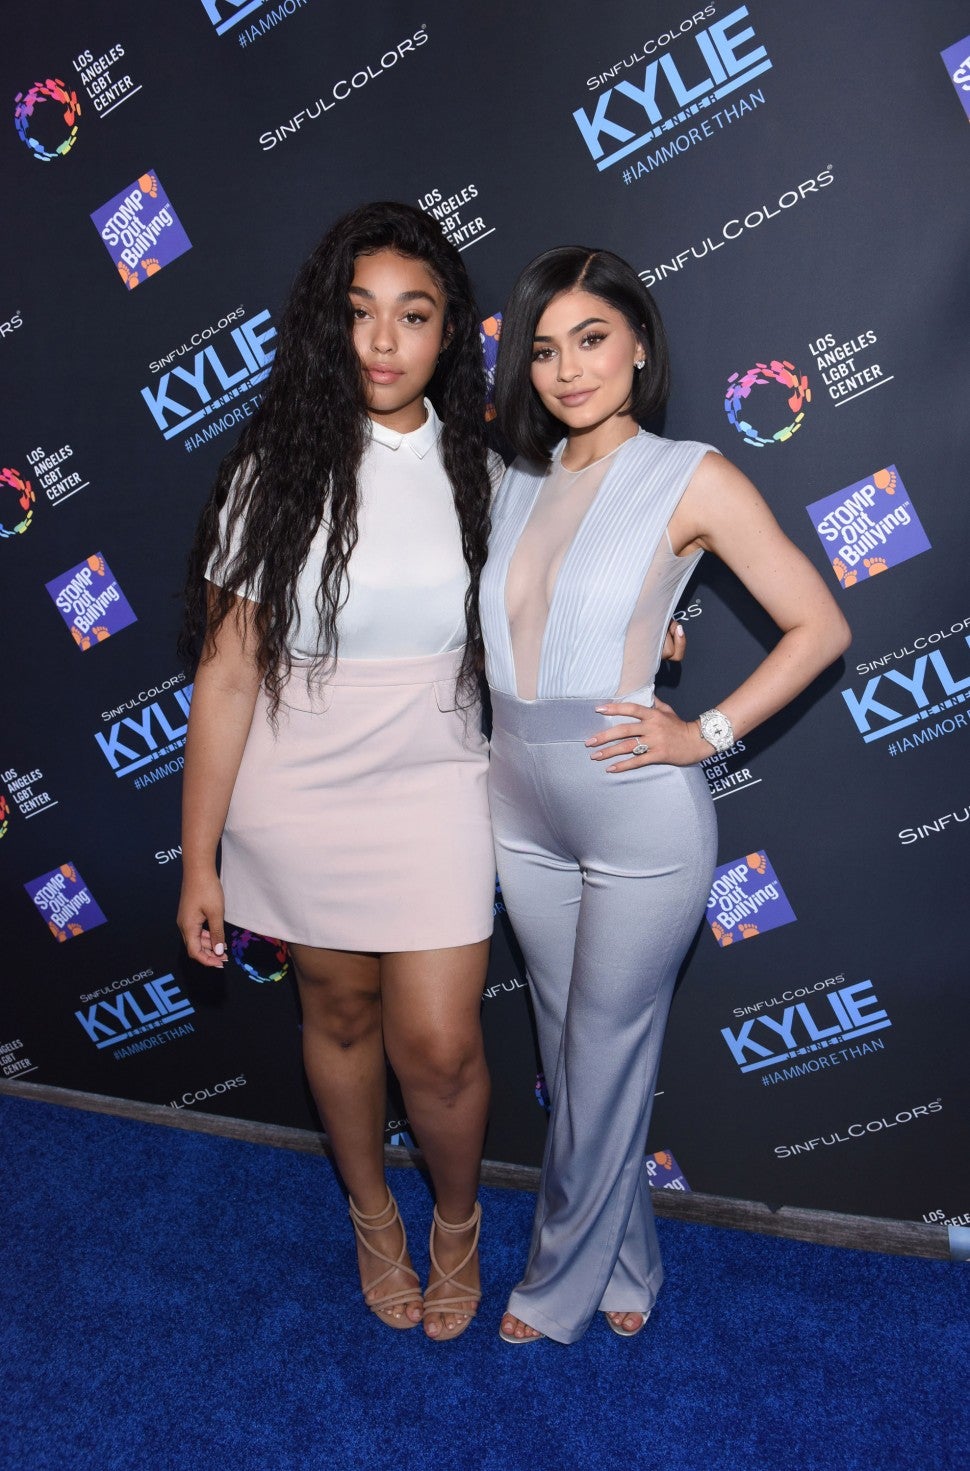 Jordyn Woods and Kylie Jenner attend SinfulColors and Kylie Jenner Announce charitybuzz.com Auction for Anti Bullying on July 14, 2016 in Los Angeles.